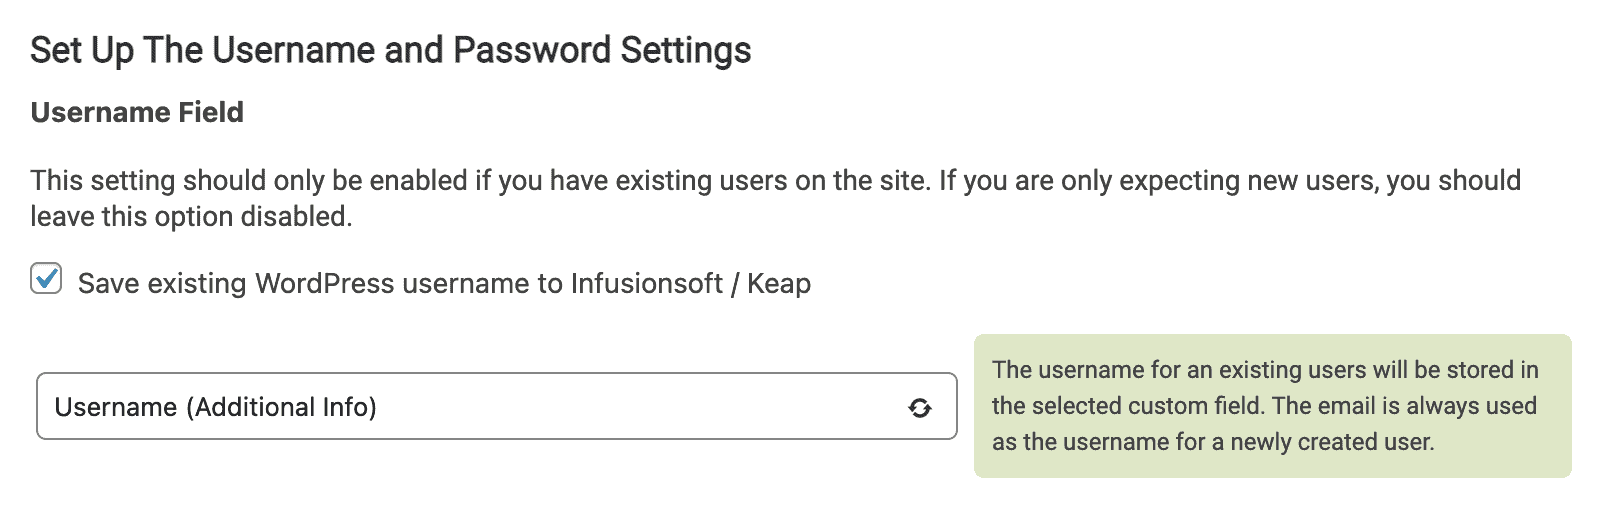 Screenshot from AccessAlly showing how to enable the username settings